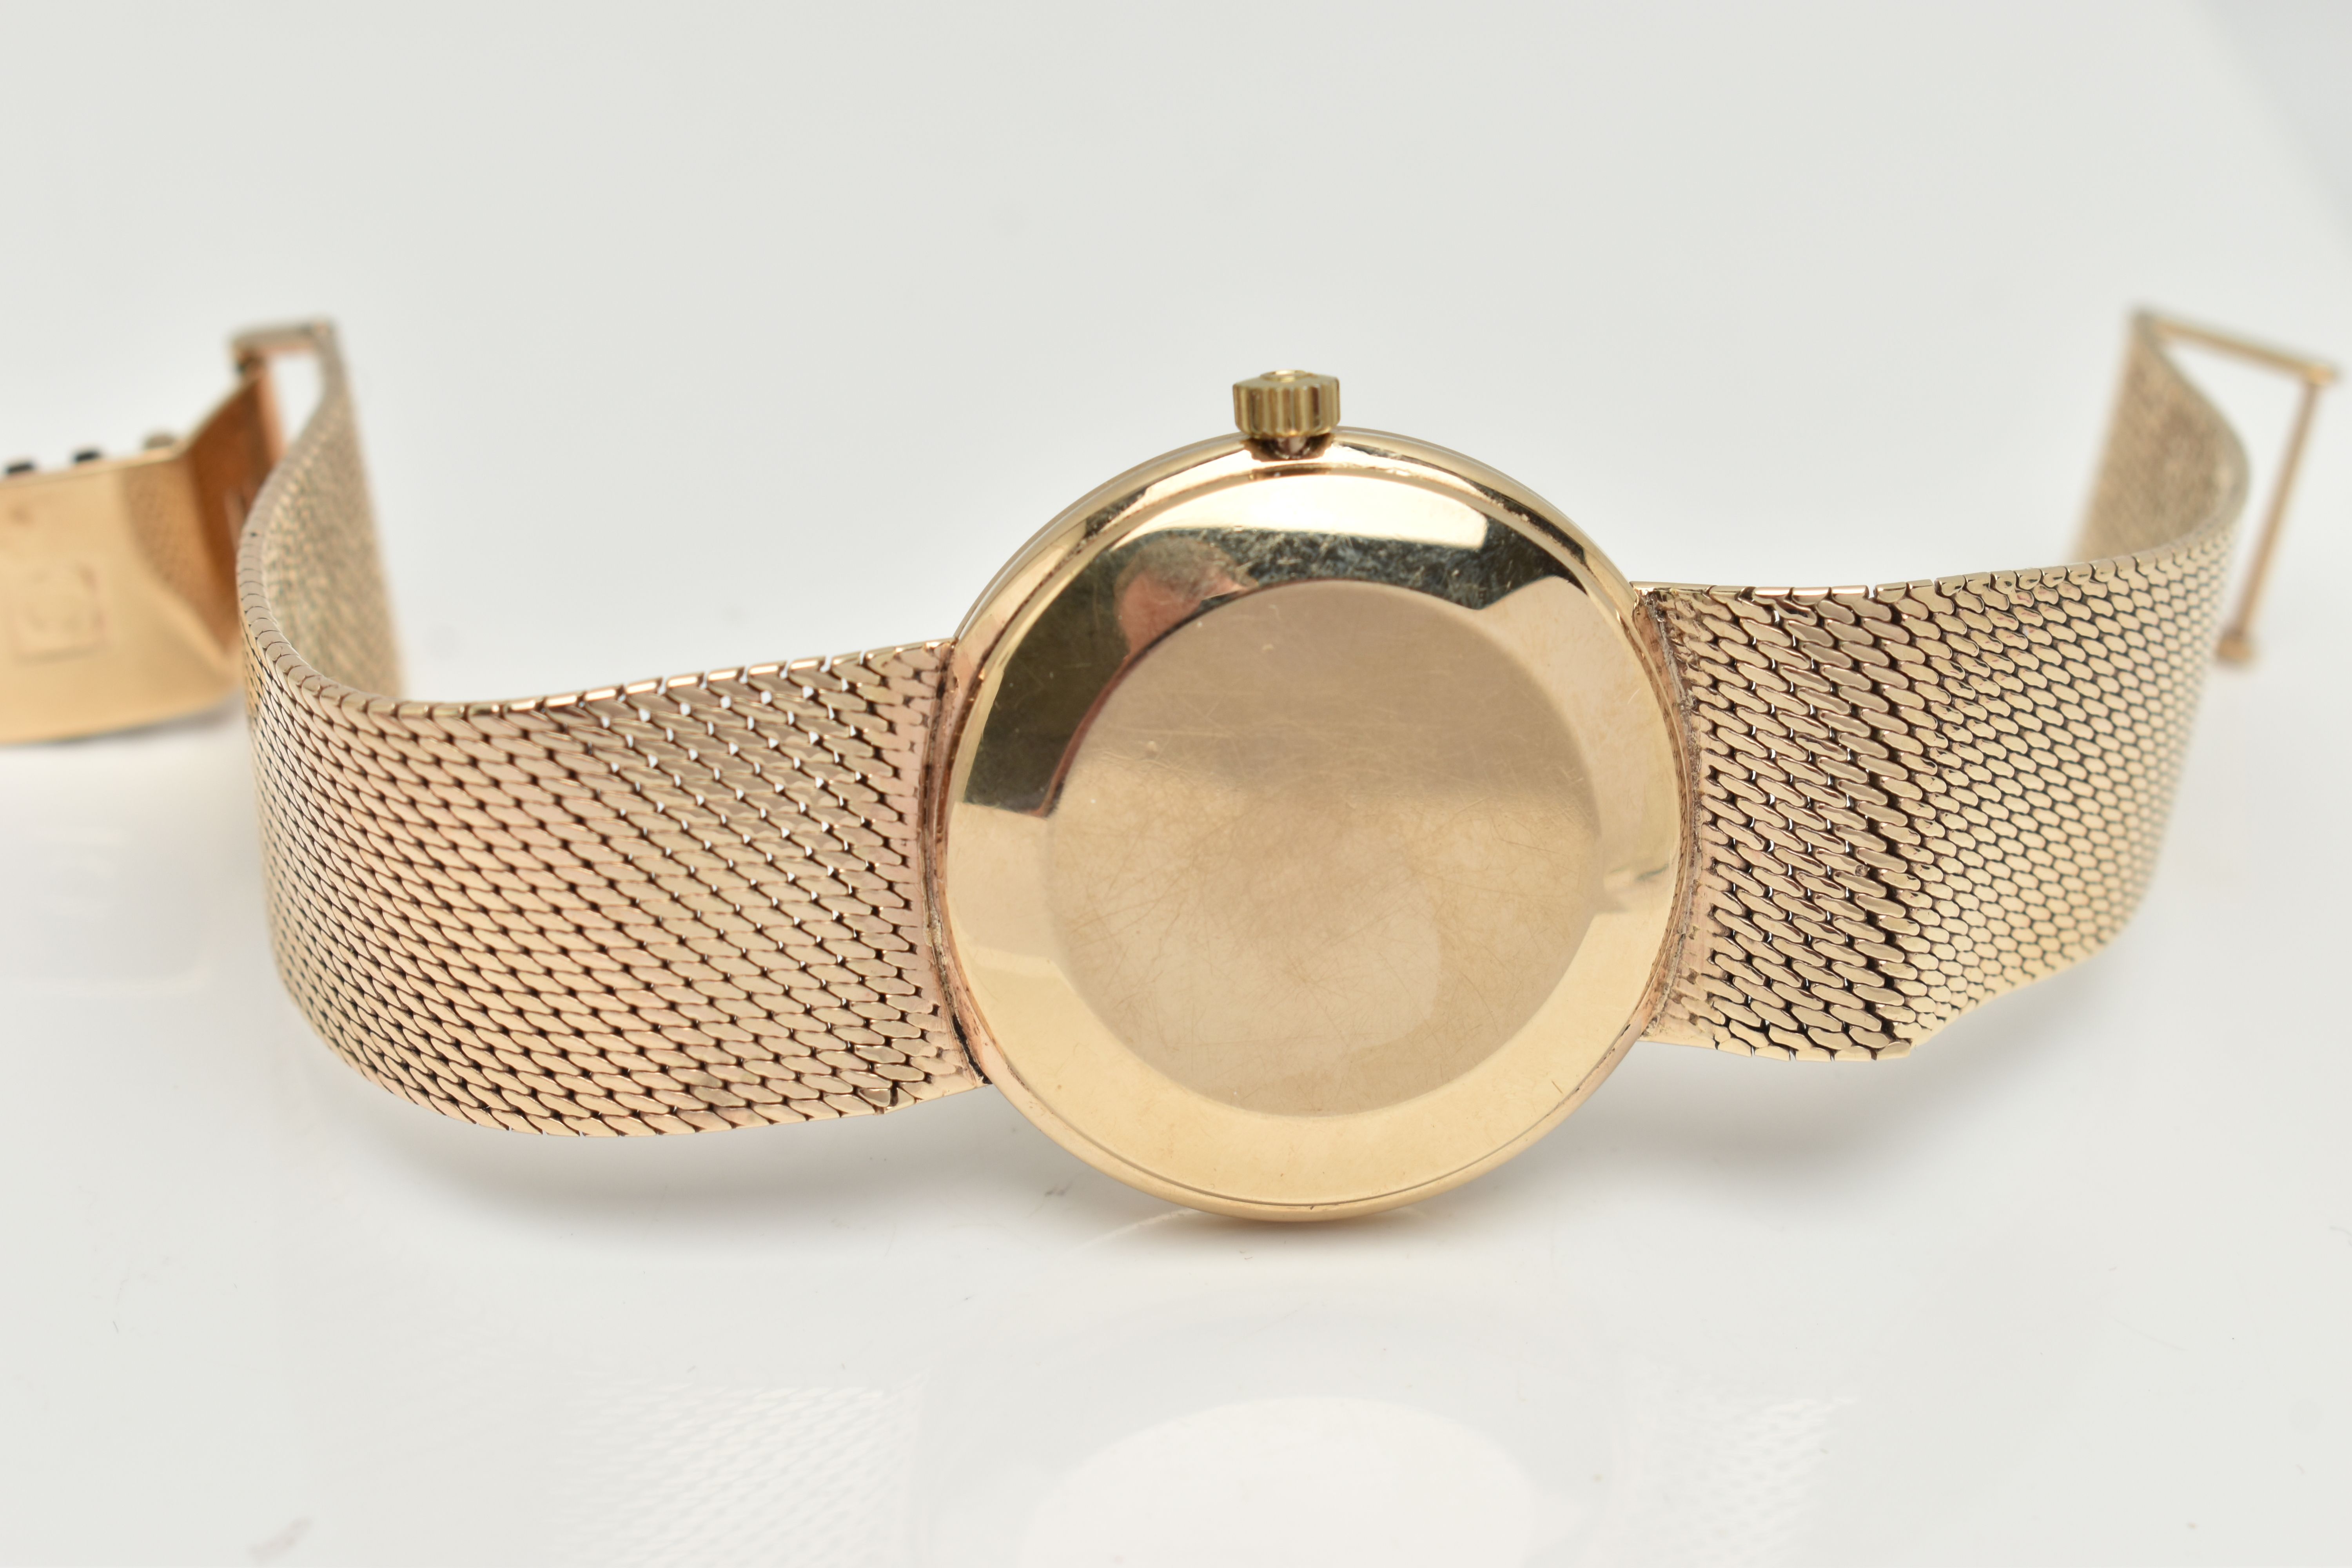 A 9CT GOLD 'OMEGA' WRISTWATCH, automatic movement, round gold tone dial, signed 'Omega automatic - Image 5 of 9